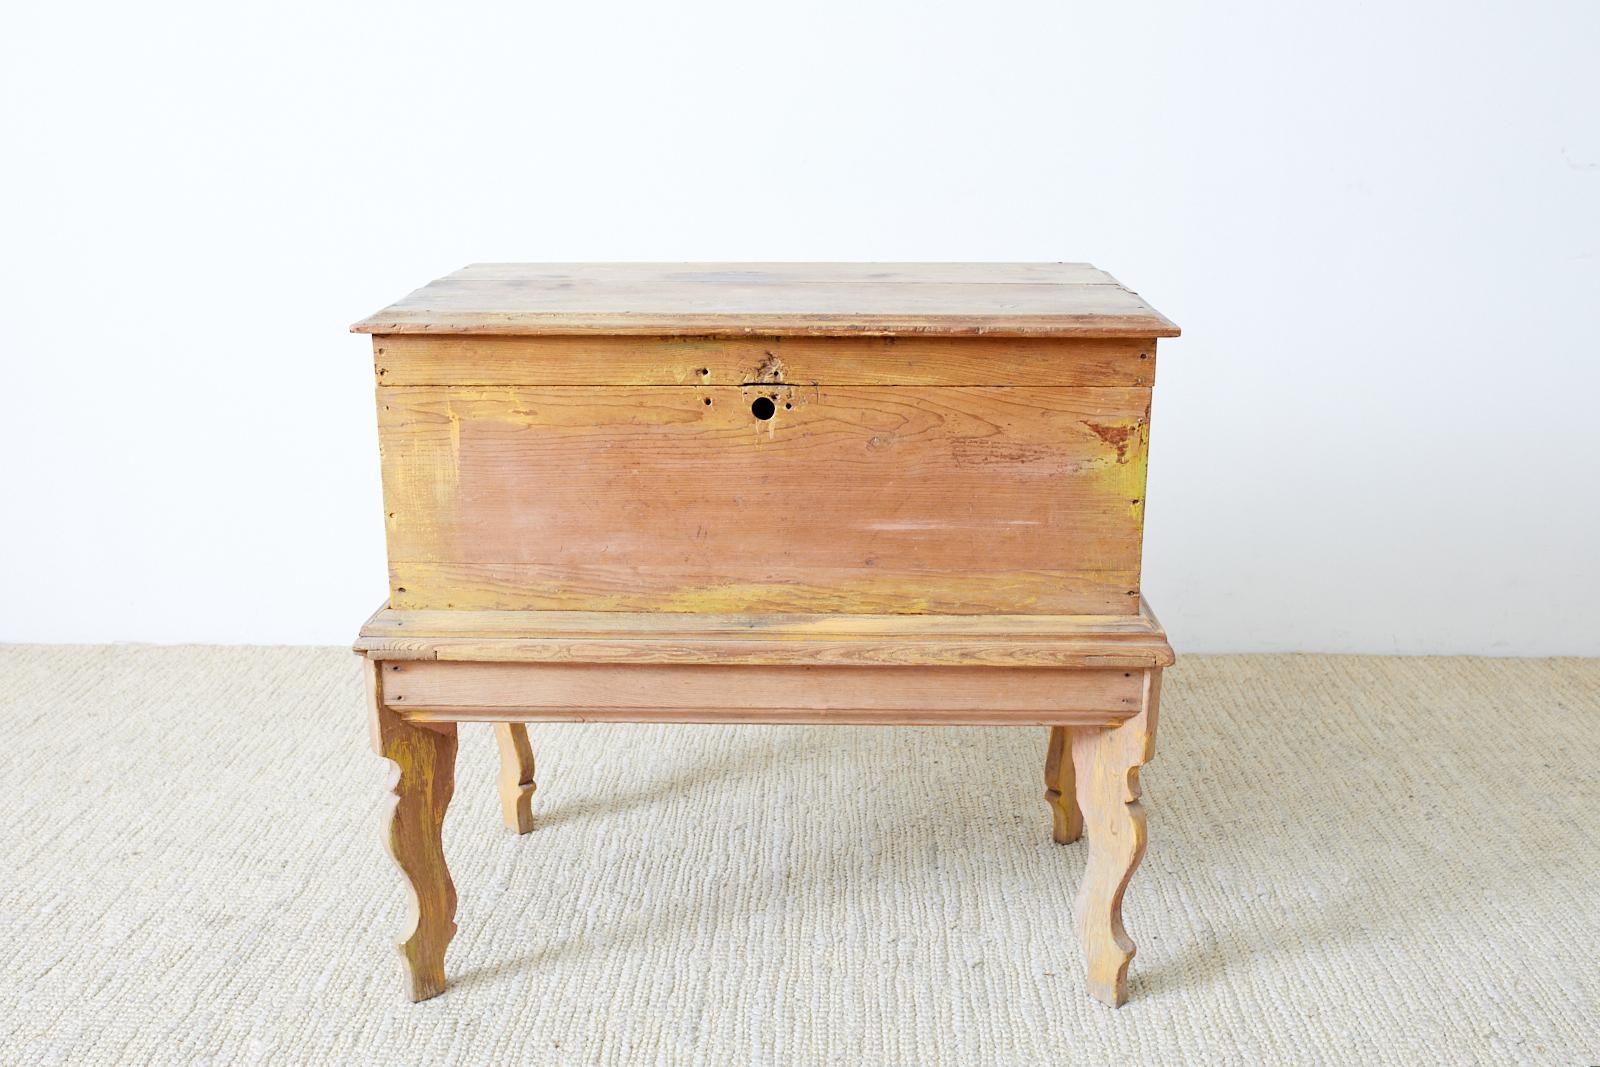 Hand-Crafted Rustic English Pine Coffer Chest on Stand